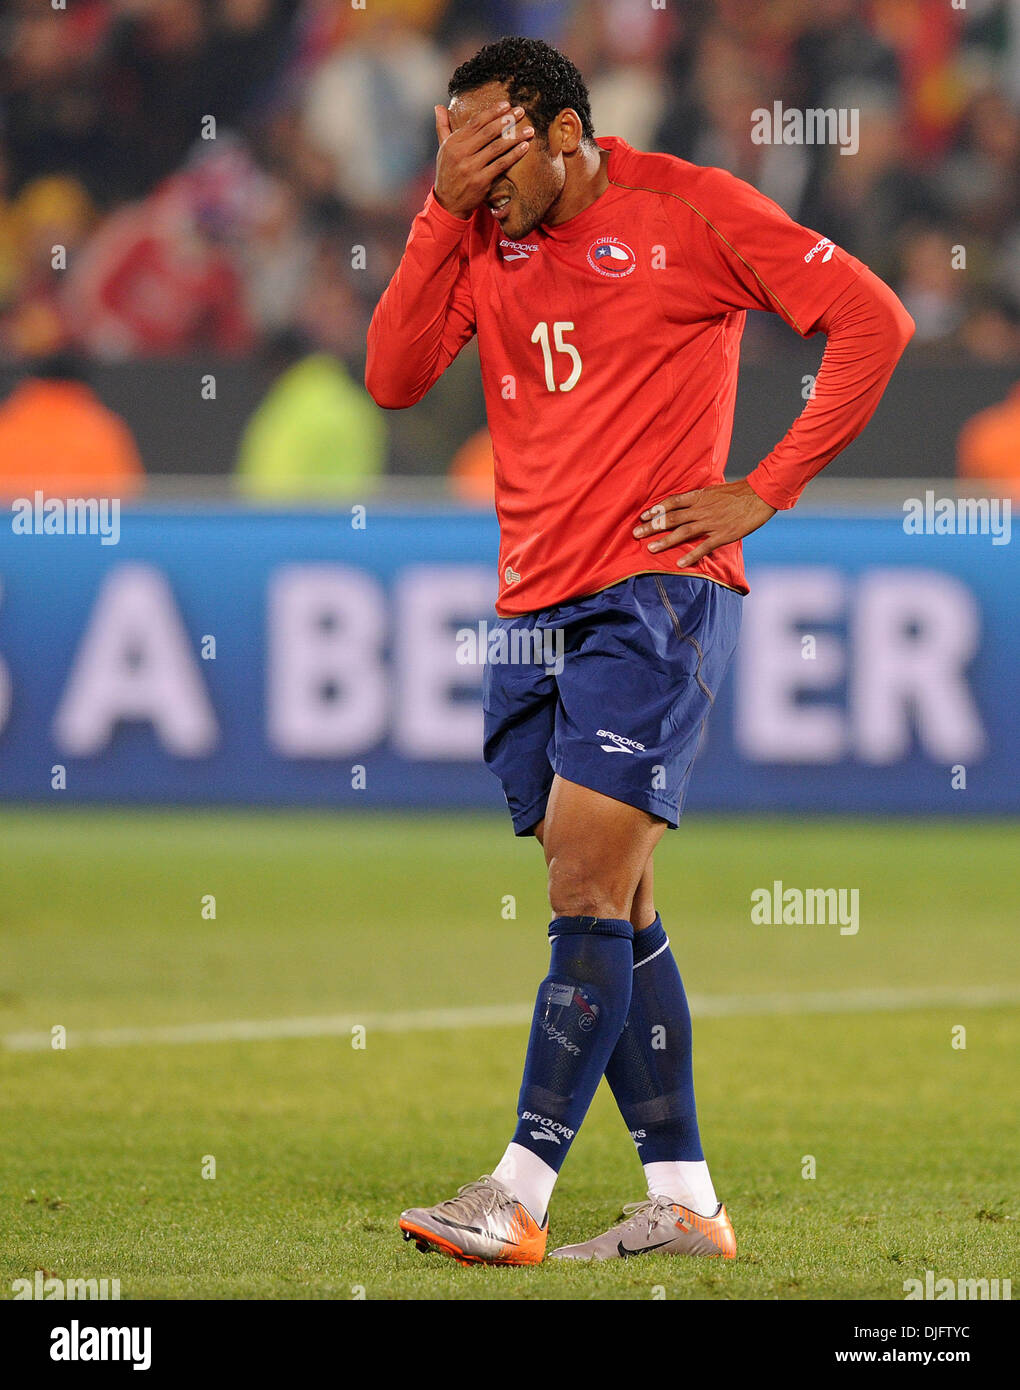 June 25, 2010 - Pretoria, South Africa - Jean Beausejour of Chile reacts during the 2010 FIFA World Cup soccer match between Chile and Spain at Loftus Versfeld Stadium on June 25, 2010 in Pretoria, South Africa. (Credit Image: © Luca Ghidoni/ZUMApress.com) Stock Photo